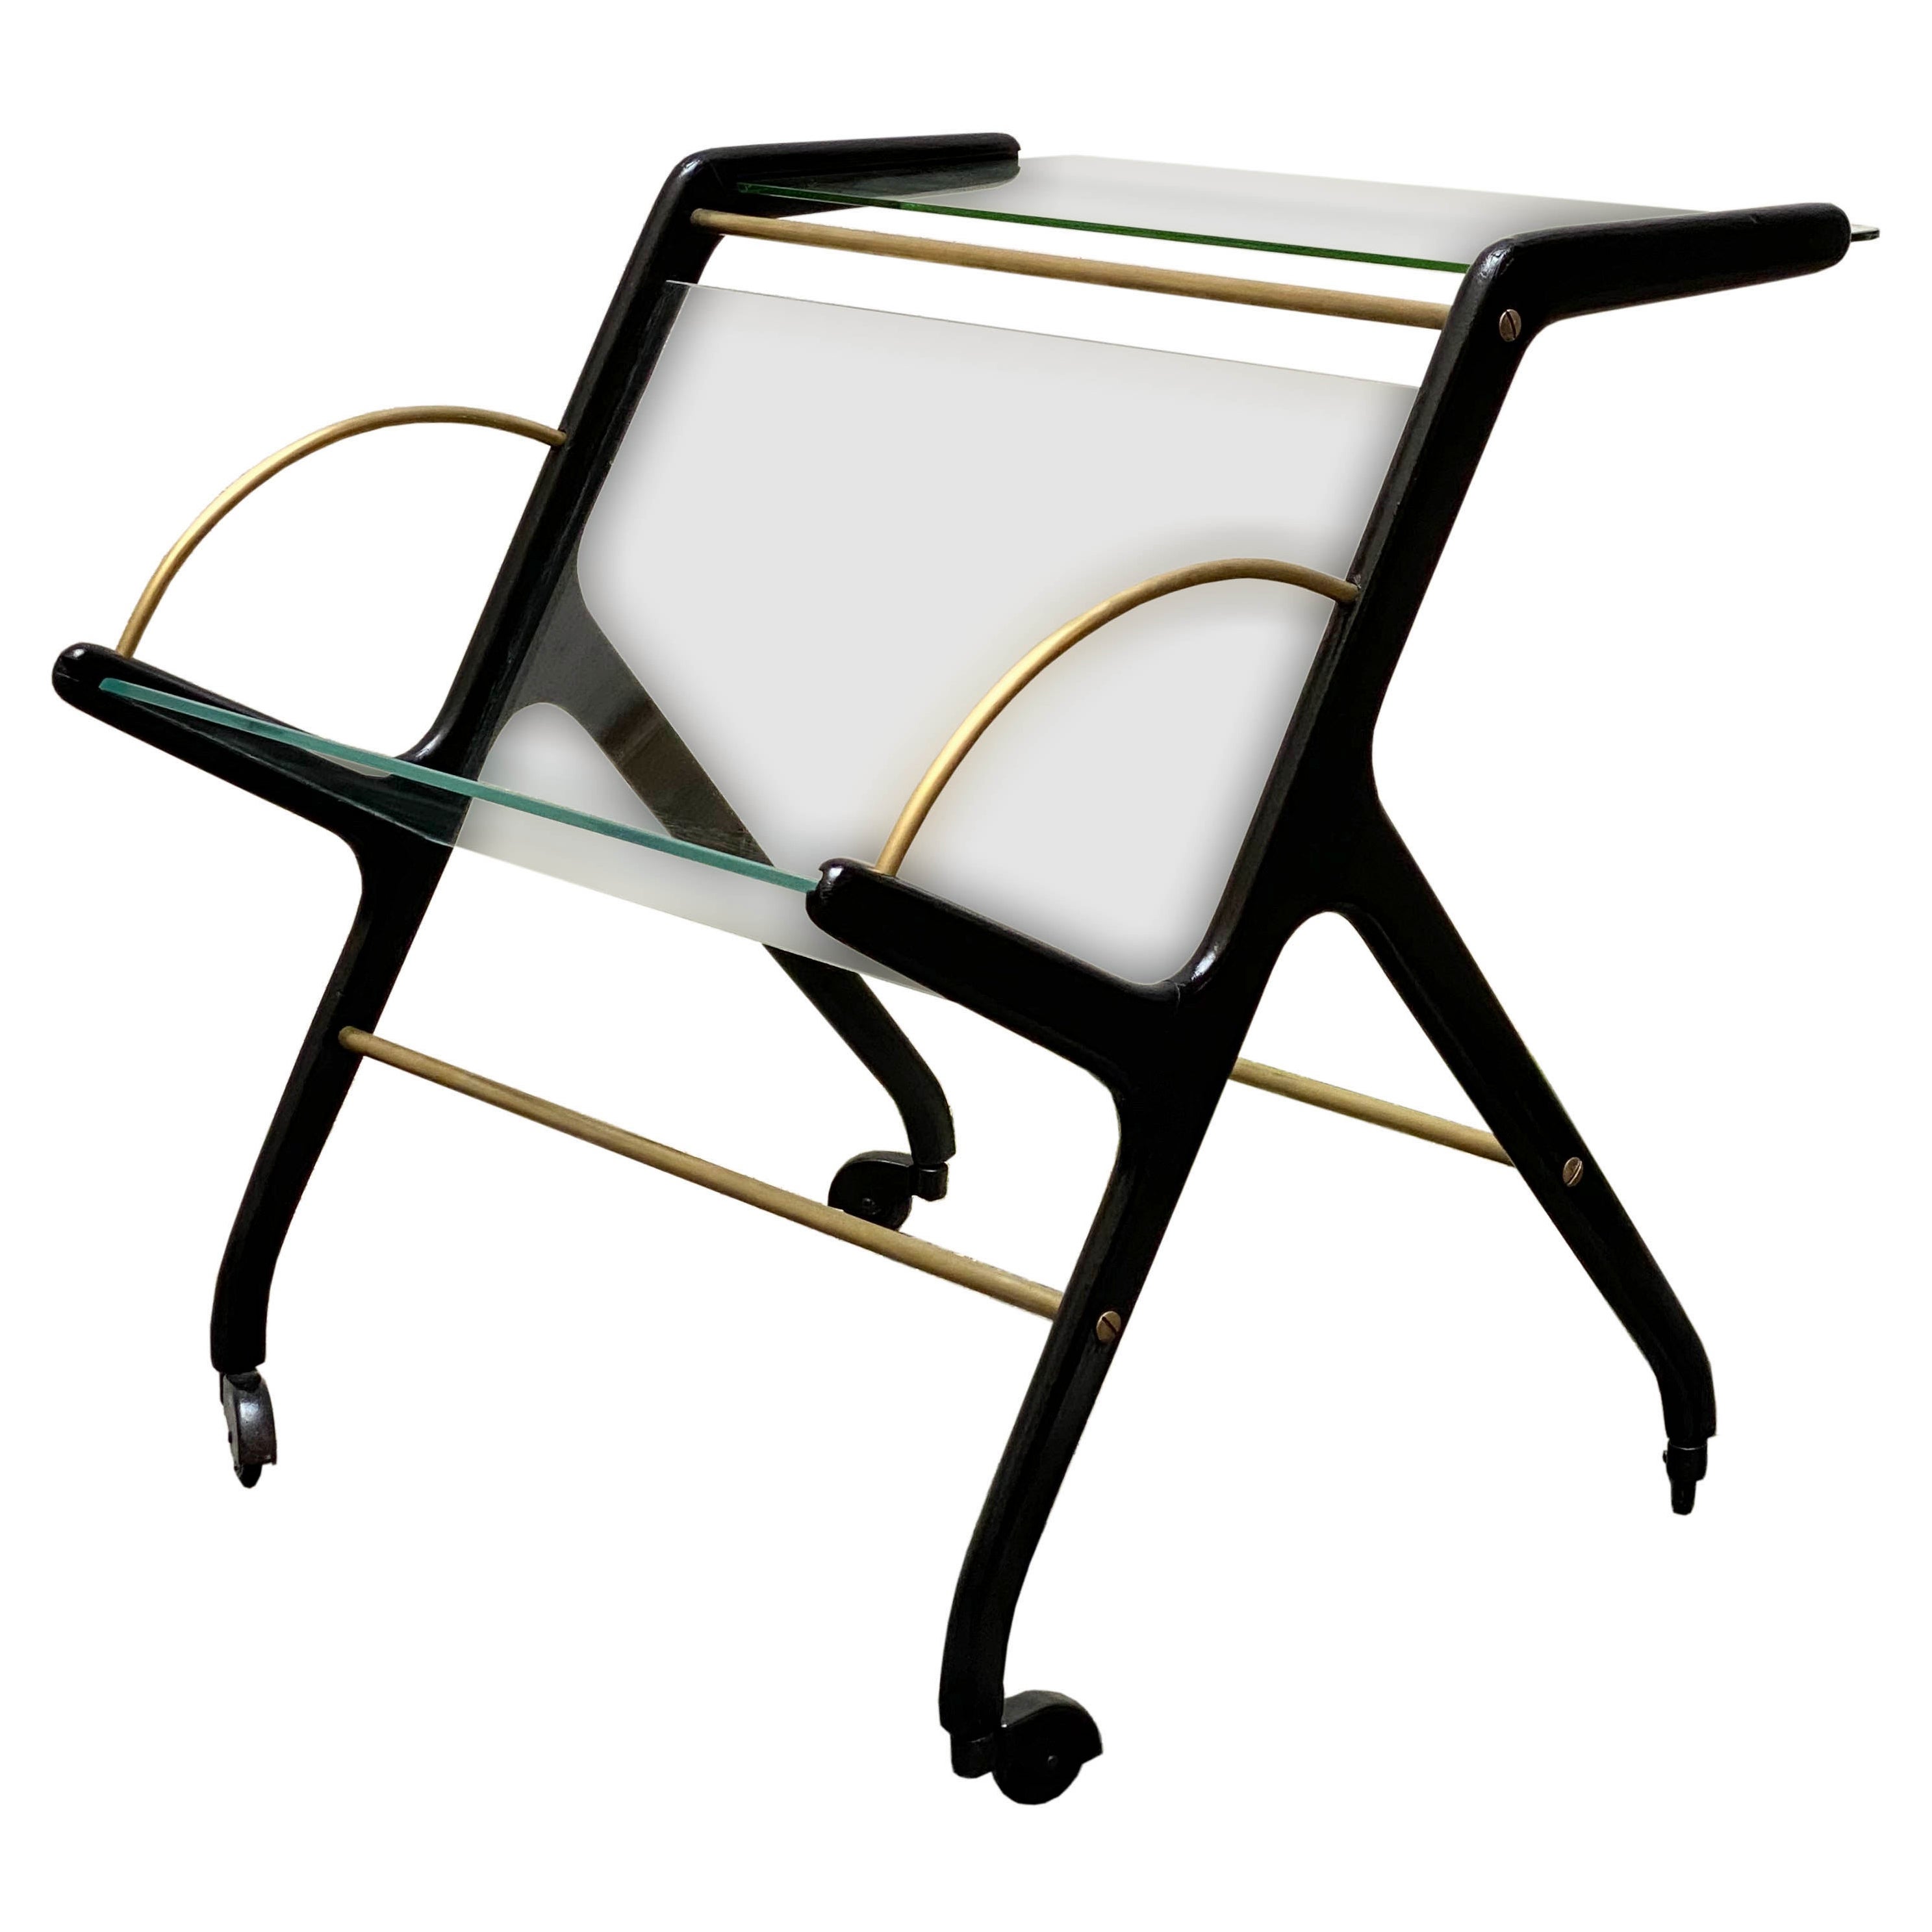 Ico Parisi Glass and Wood Magazine Rack with Wheels, 1950s For Sale